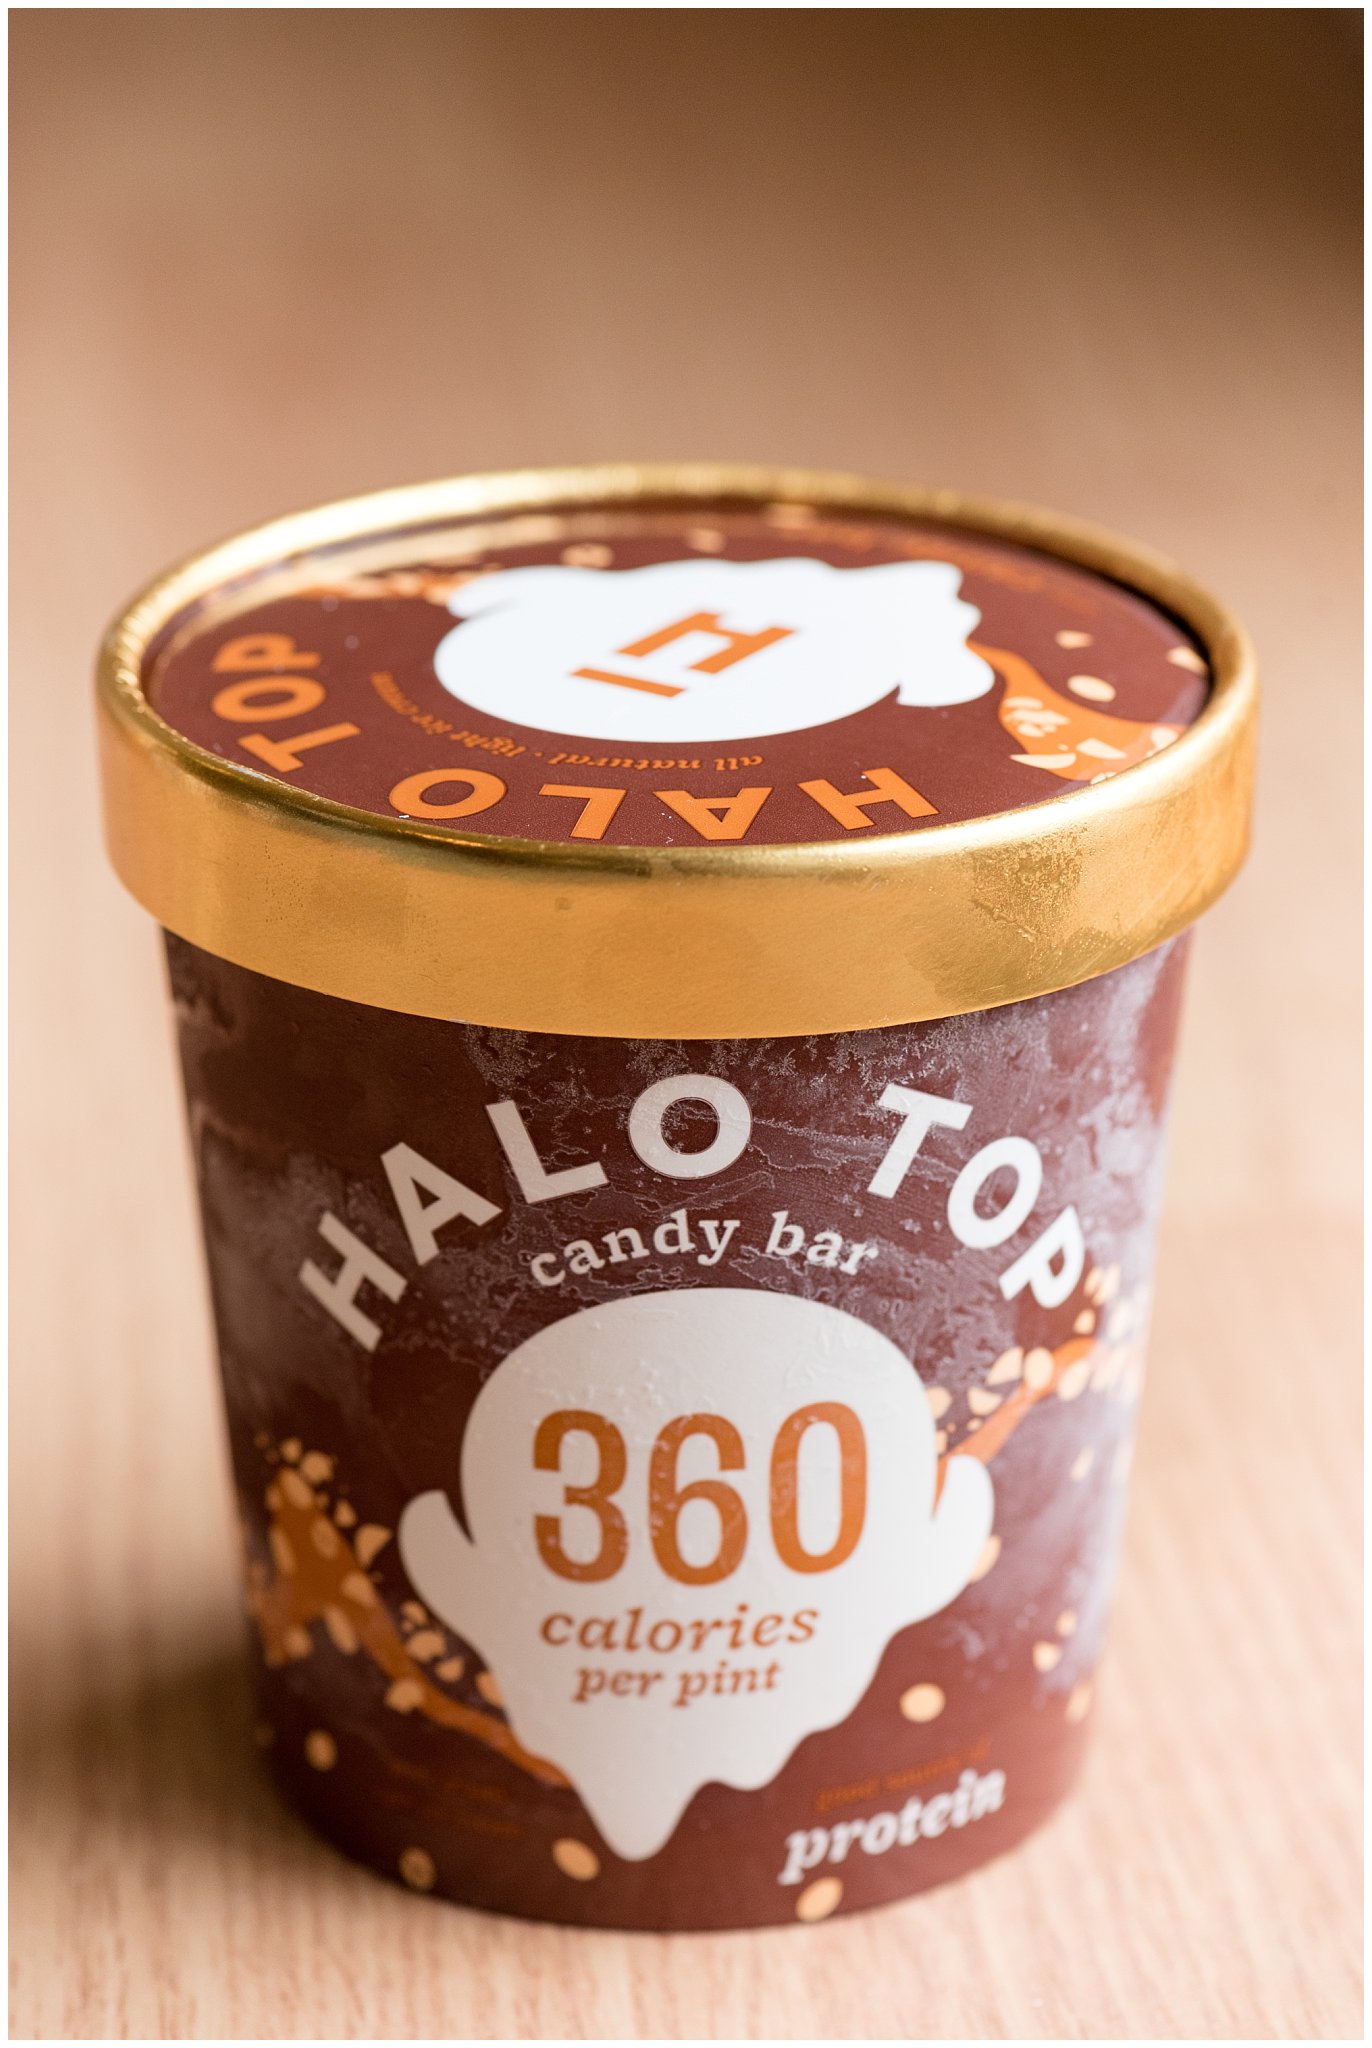 Candy Bar | Review of Halo Top Ice Cream Flavors